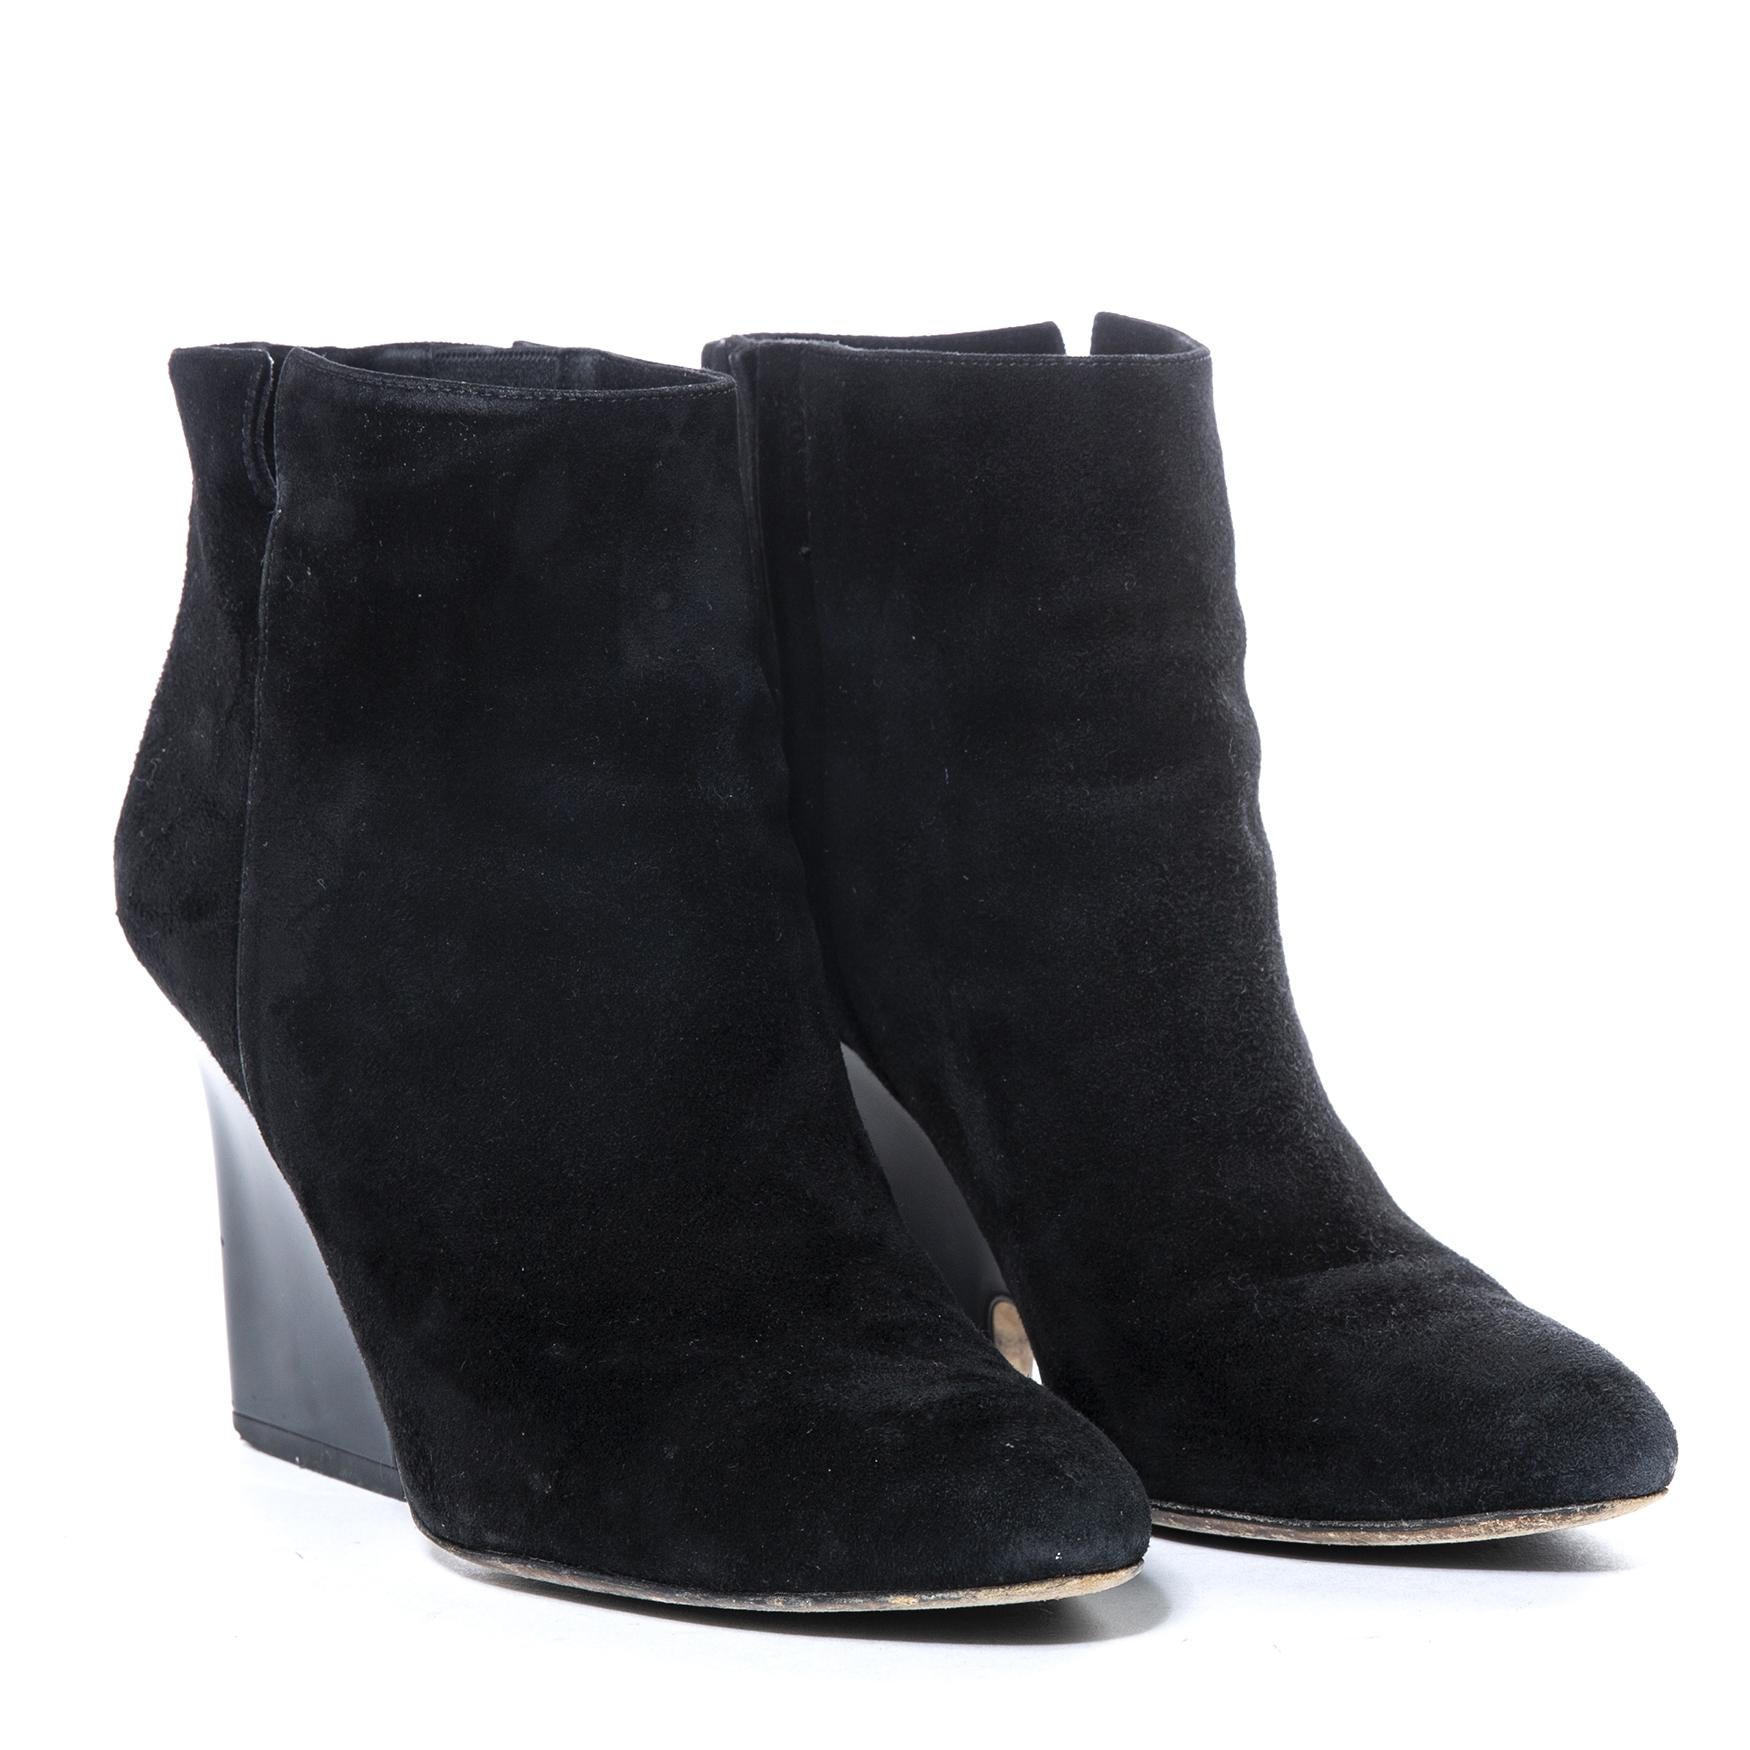 Women's Jimmy Choo Black Suede Ankle Boots - Size 36 For Sale